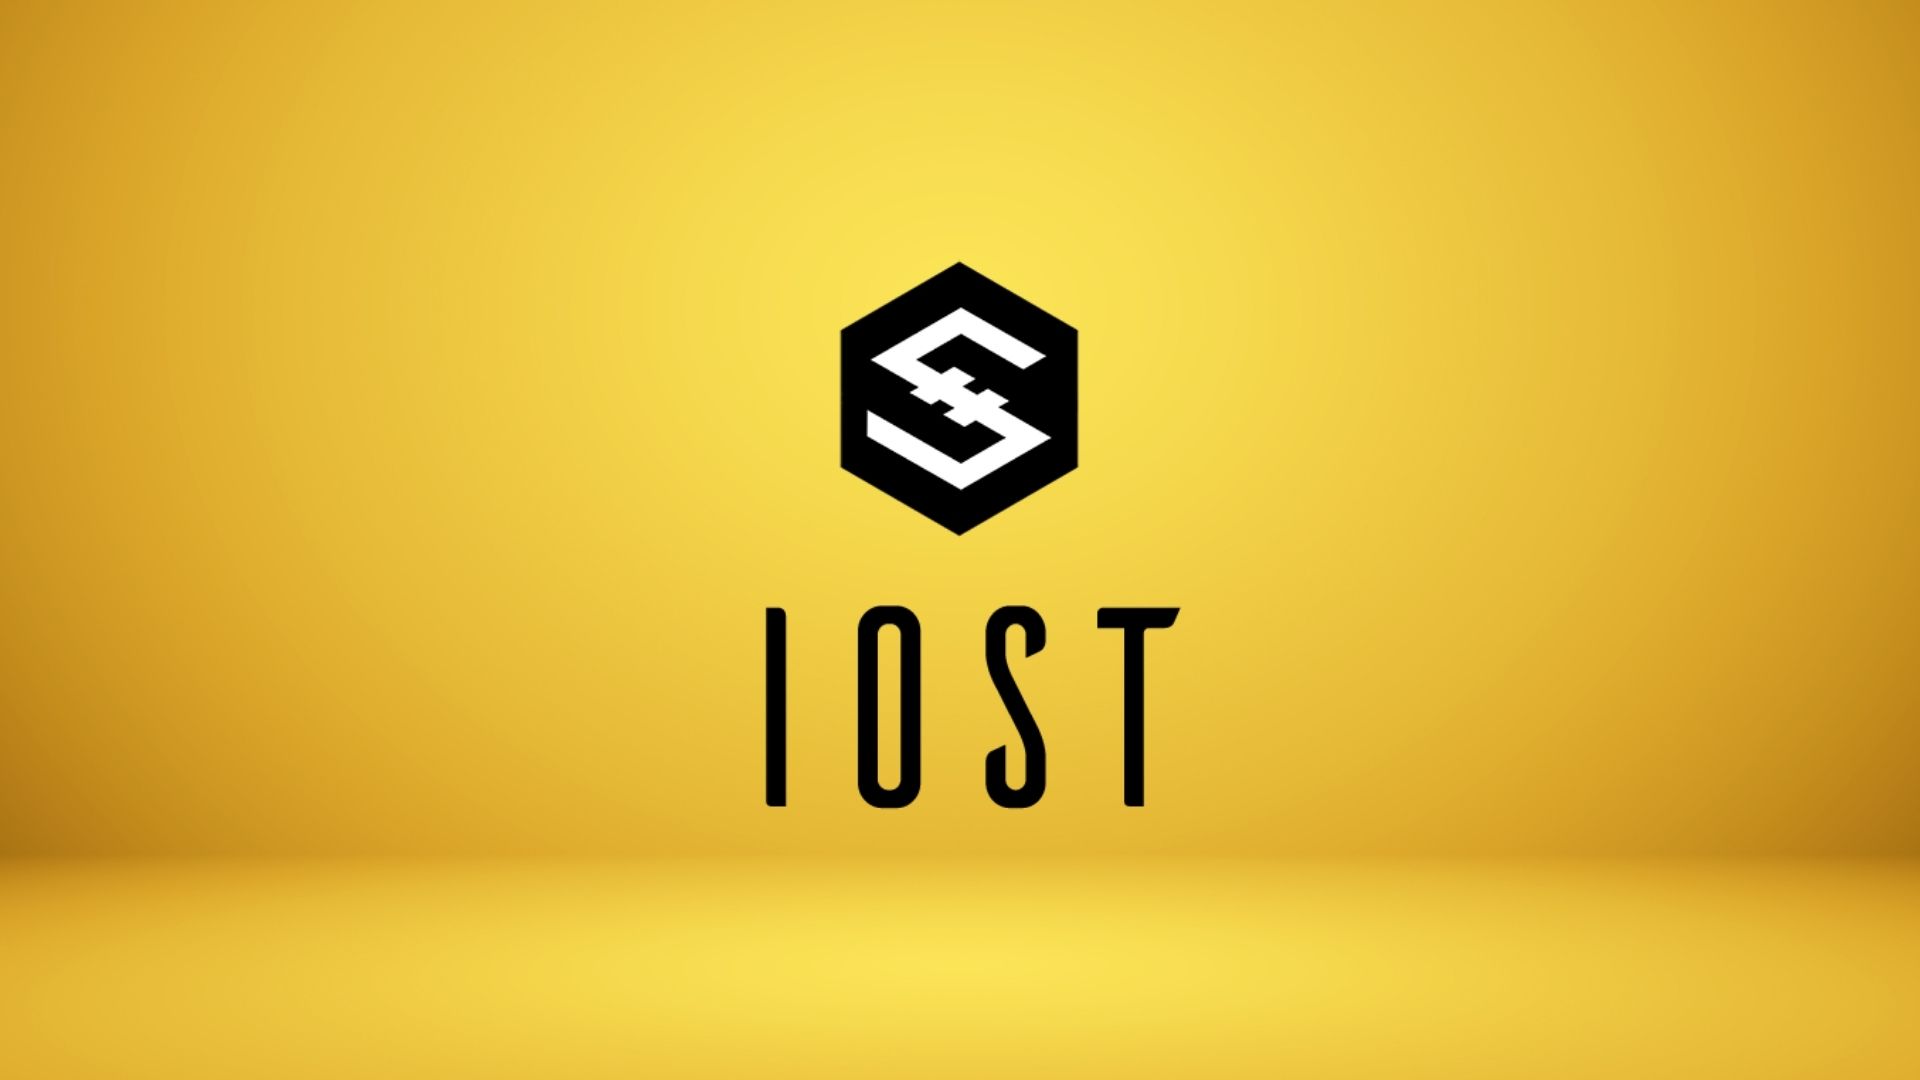 IOST Coin Investment: Overall Performance